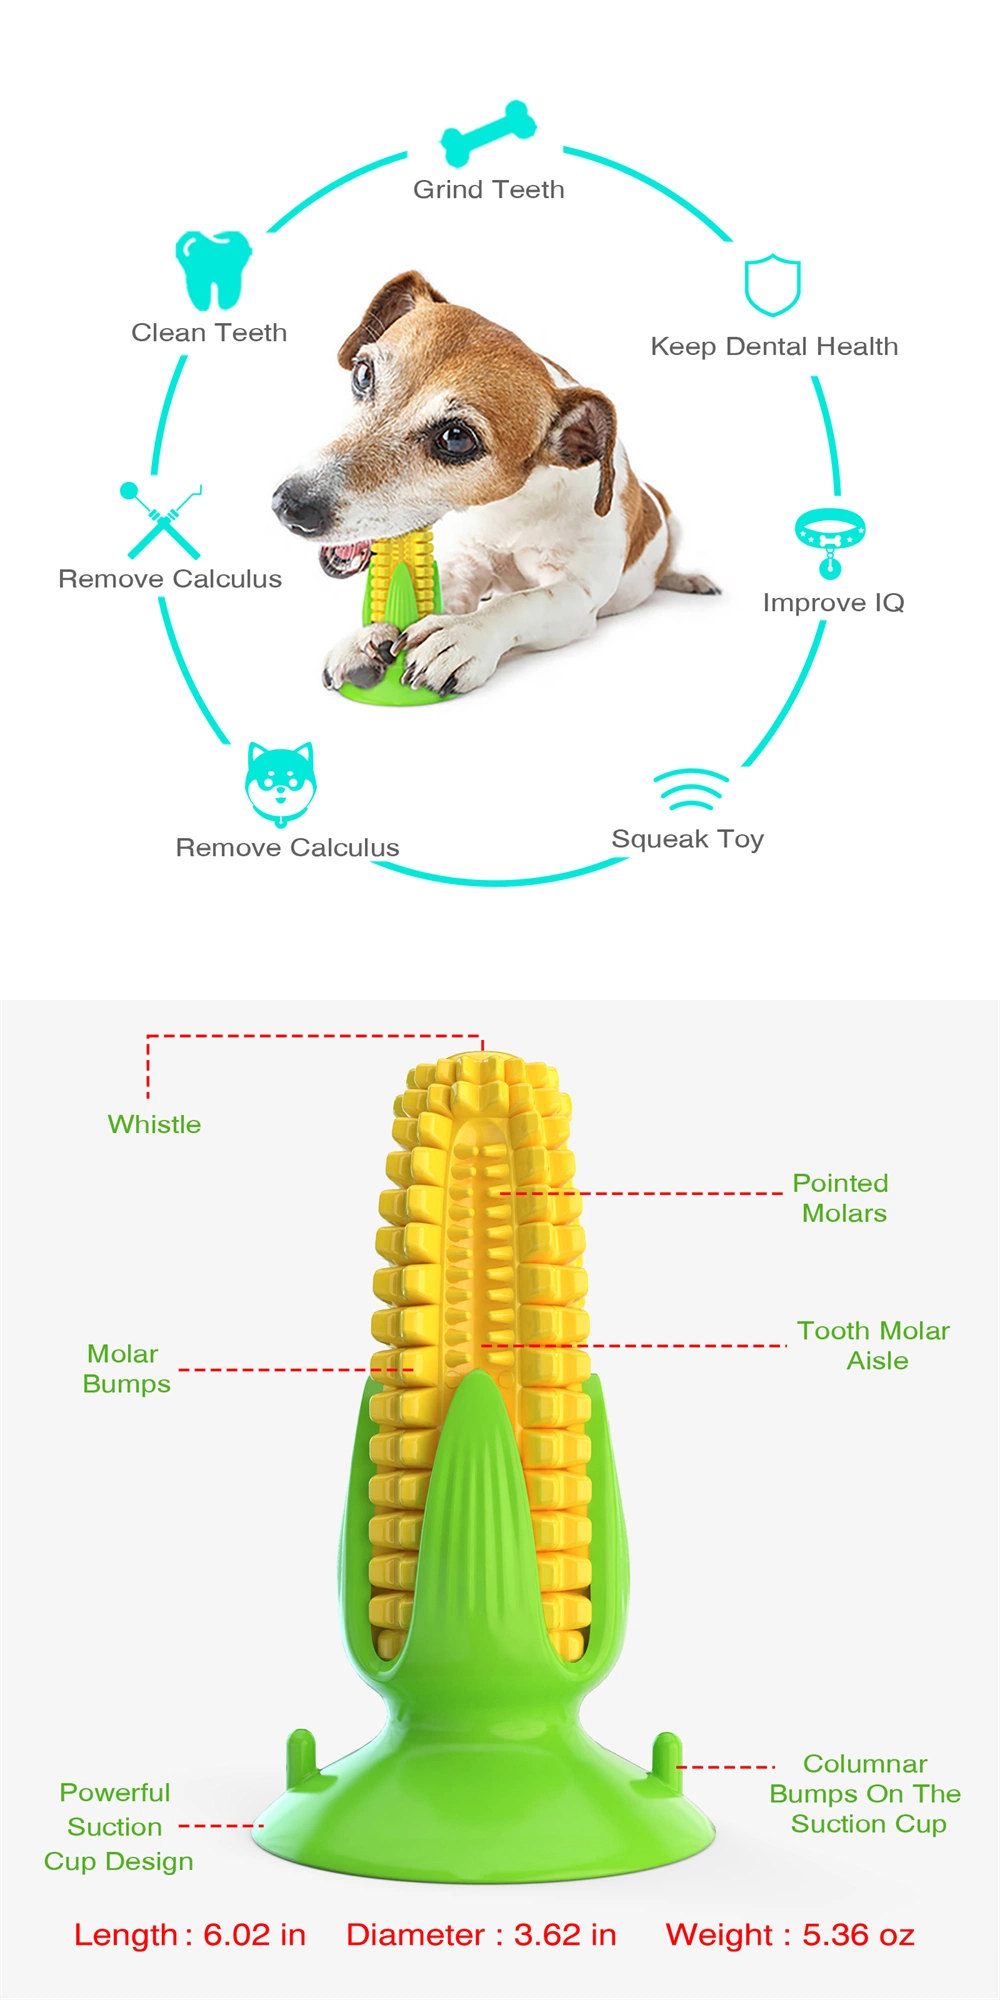 Indestructible Tough Durable Squeaky Interactive Dog Toys Puppy Teeth Chew Corn Stick Toy for Small Meduium Large Breed with Suction Cup